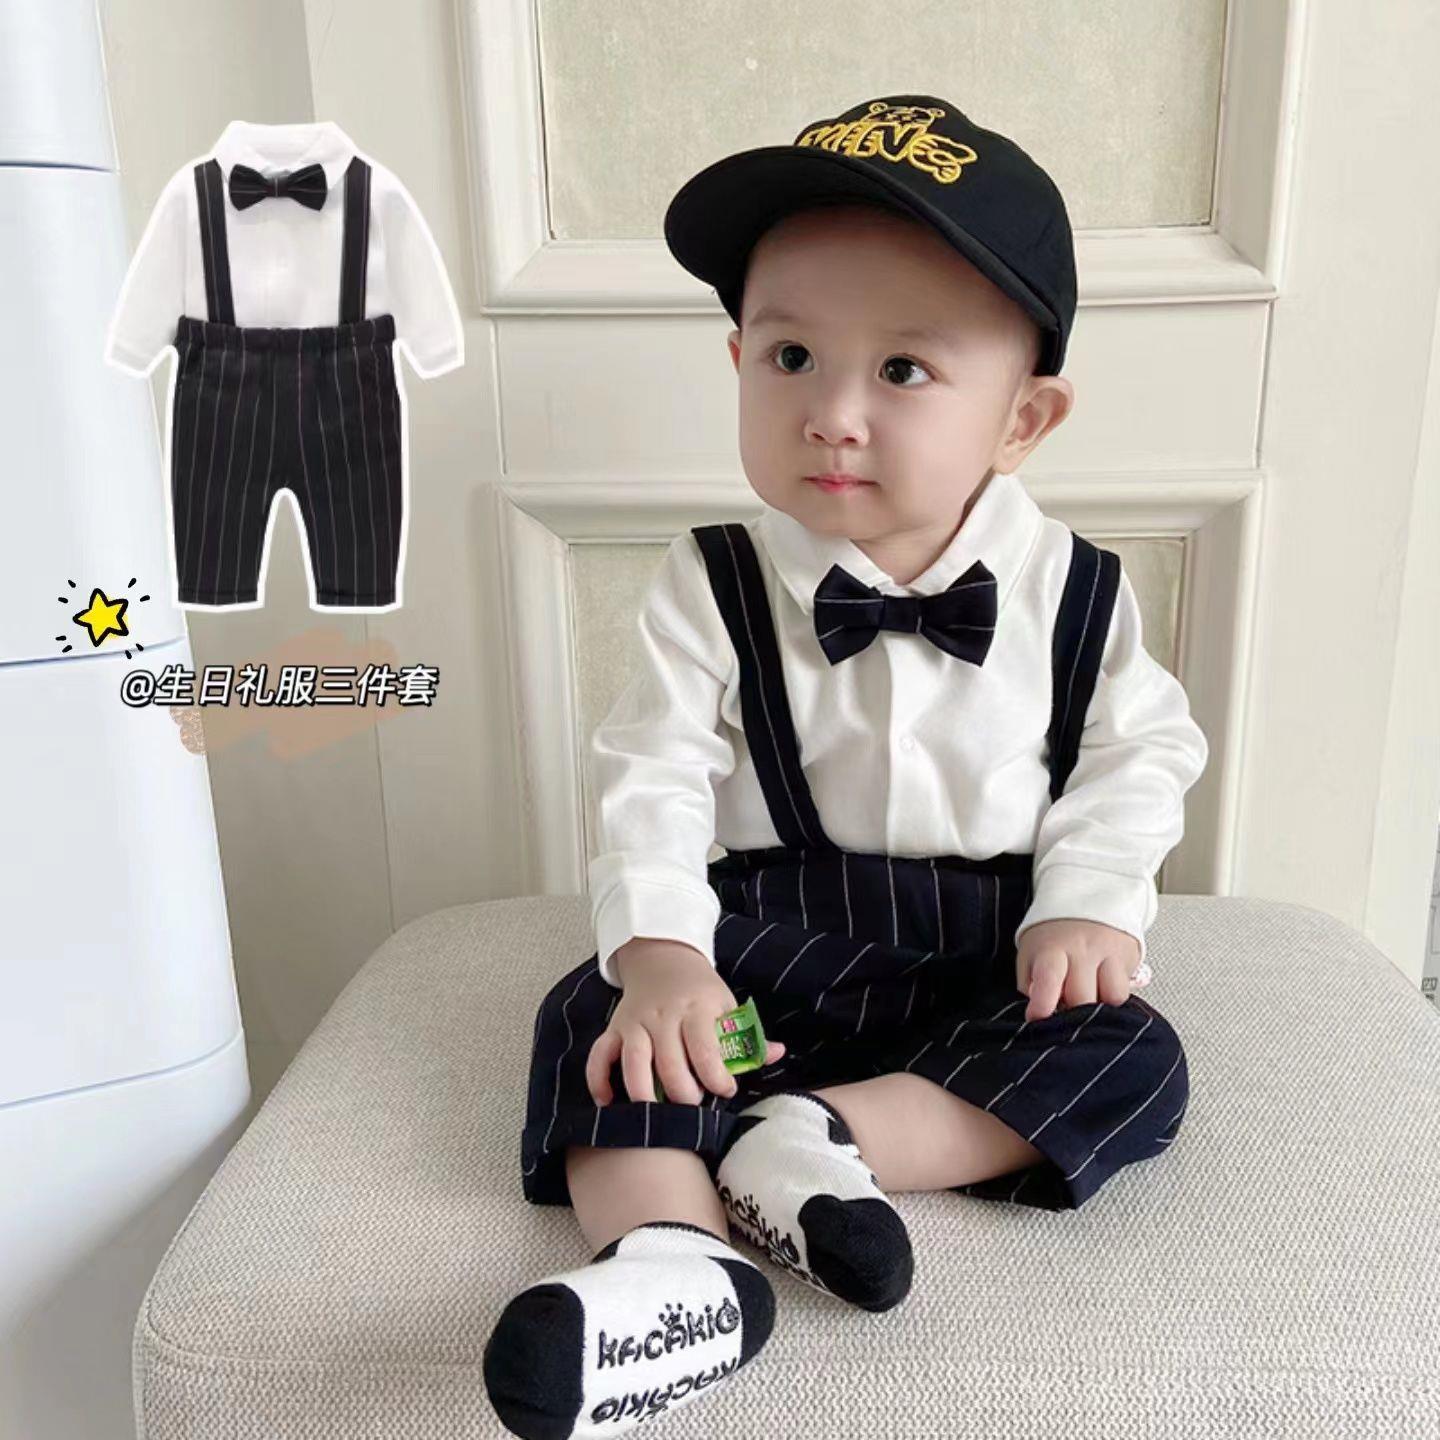 Baby Boy Clothes Kids Clothes for Boys 1 2 3 Year Old Baby Outfit for  Birthday